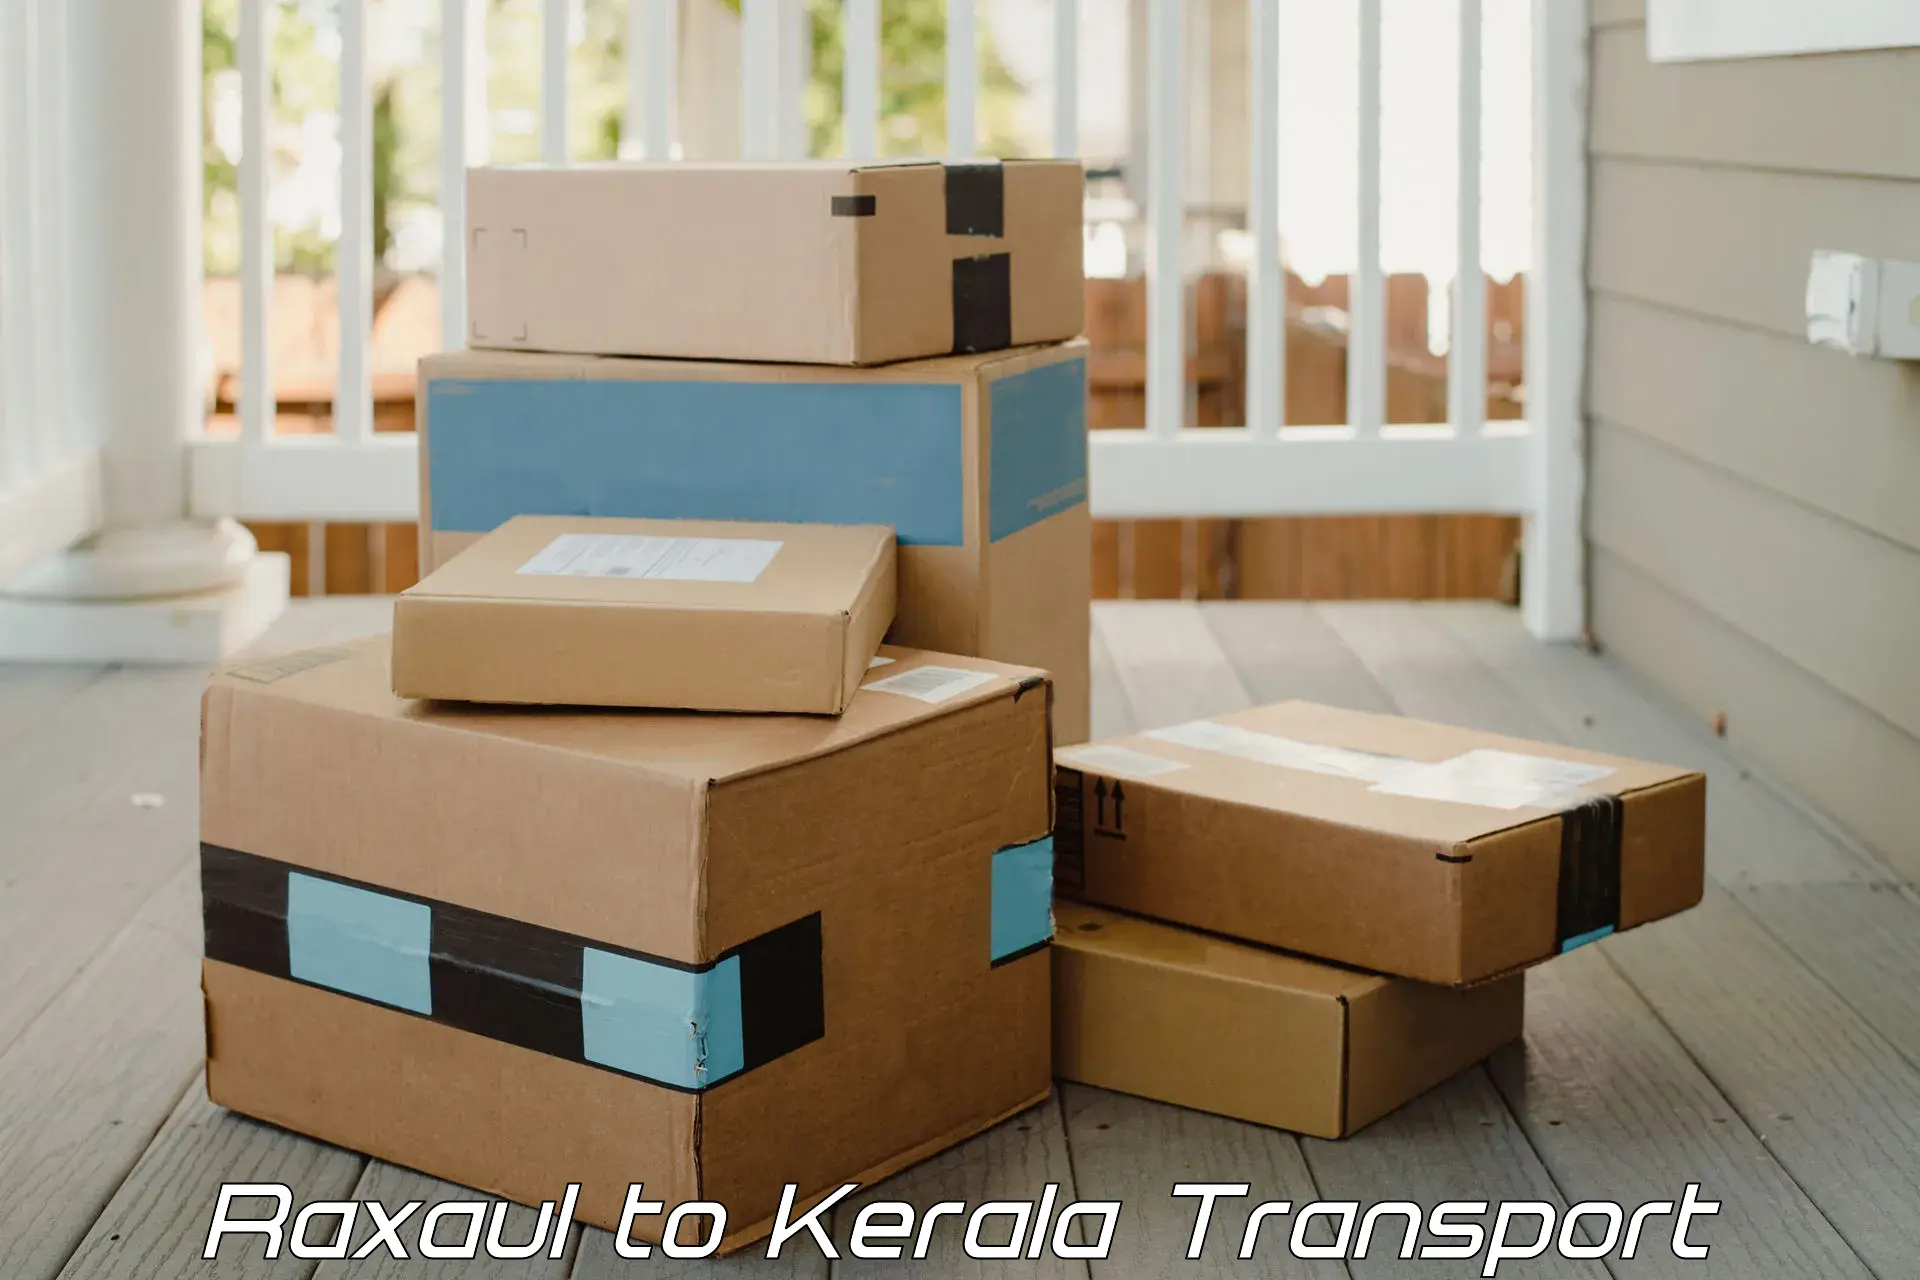 Goods delivery service Raxaul to Kerala